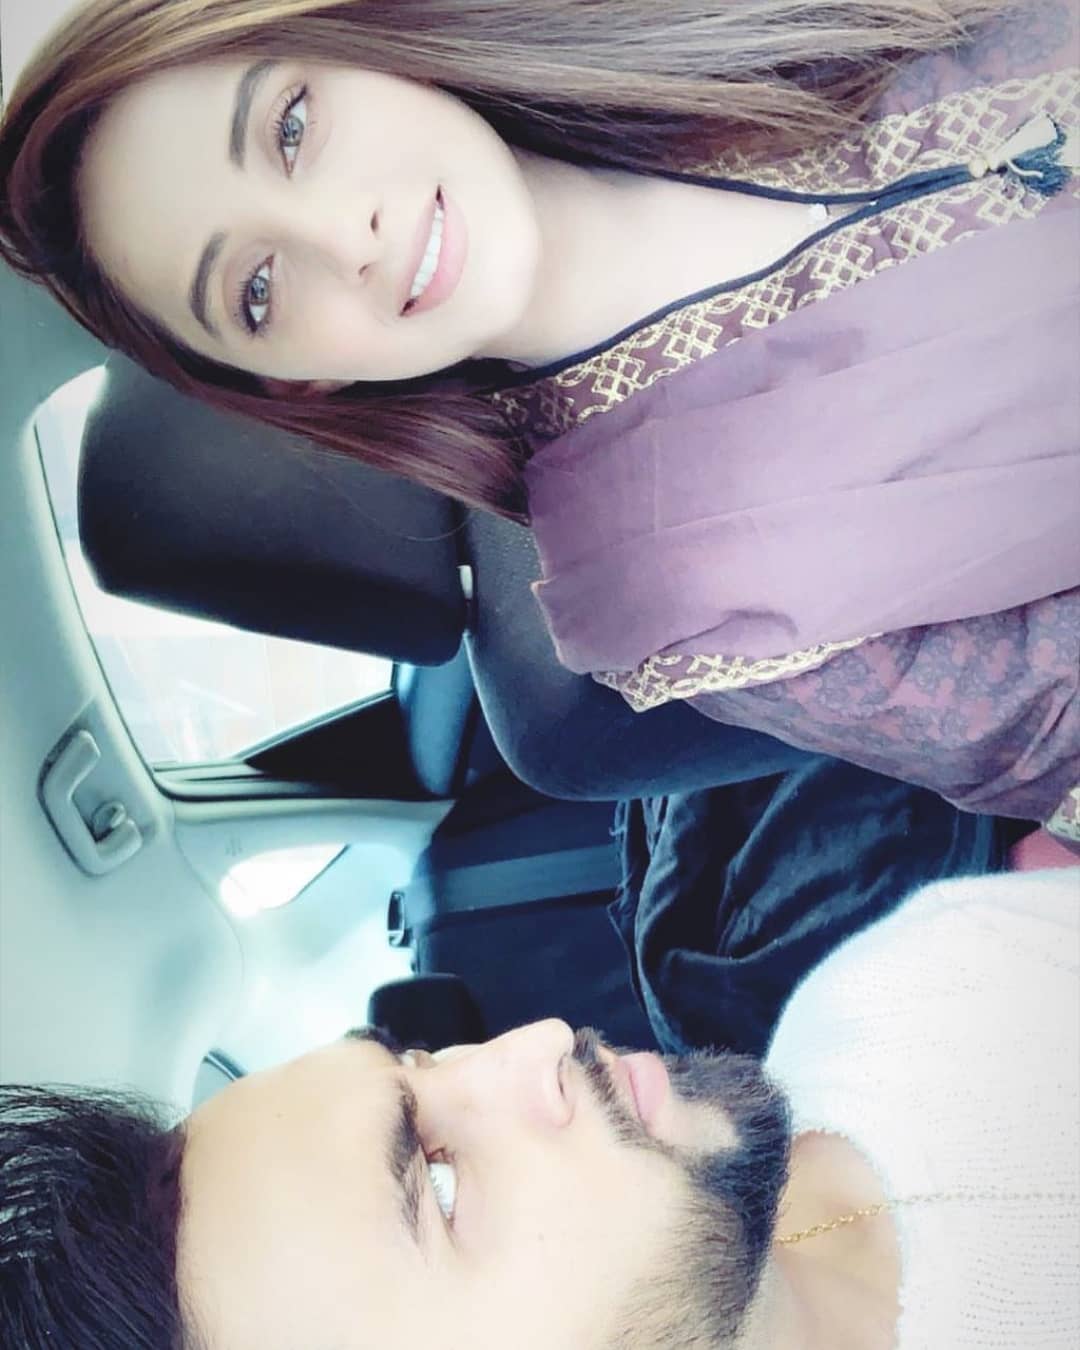 Latest Clicks of Sanam Chaudhry with her Husband Somee Chohan